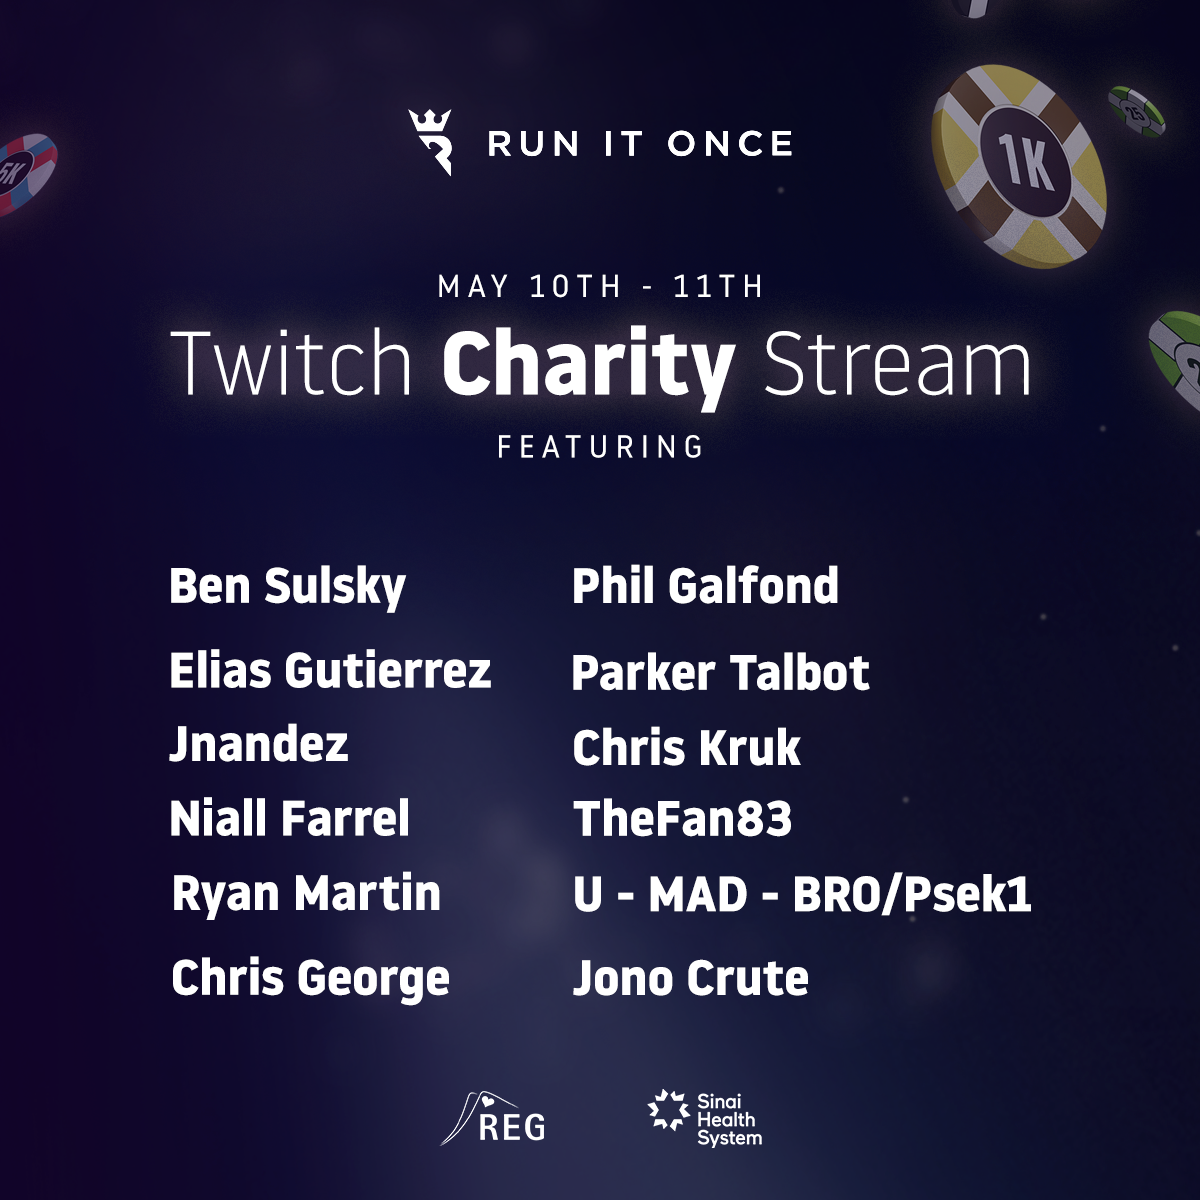 Run It Once to Host a 24 Hour Charity Twitch Stream